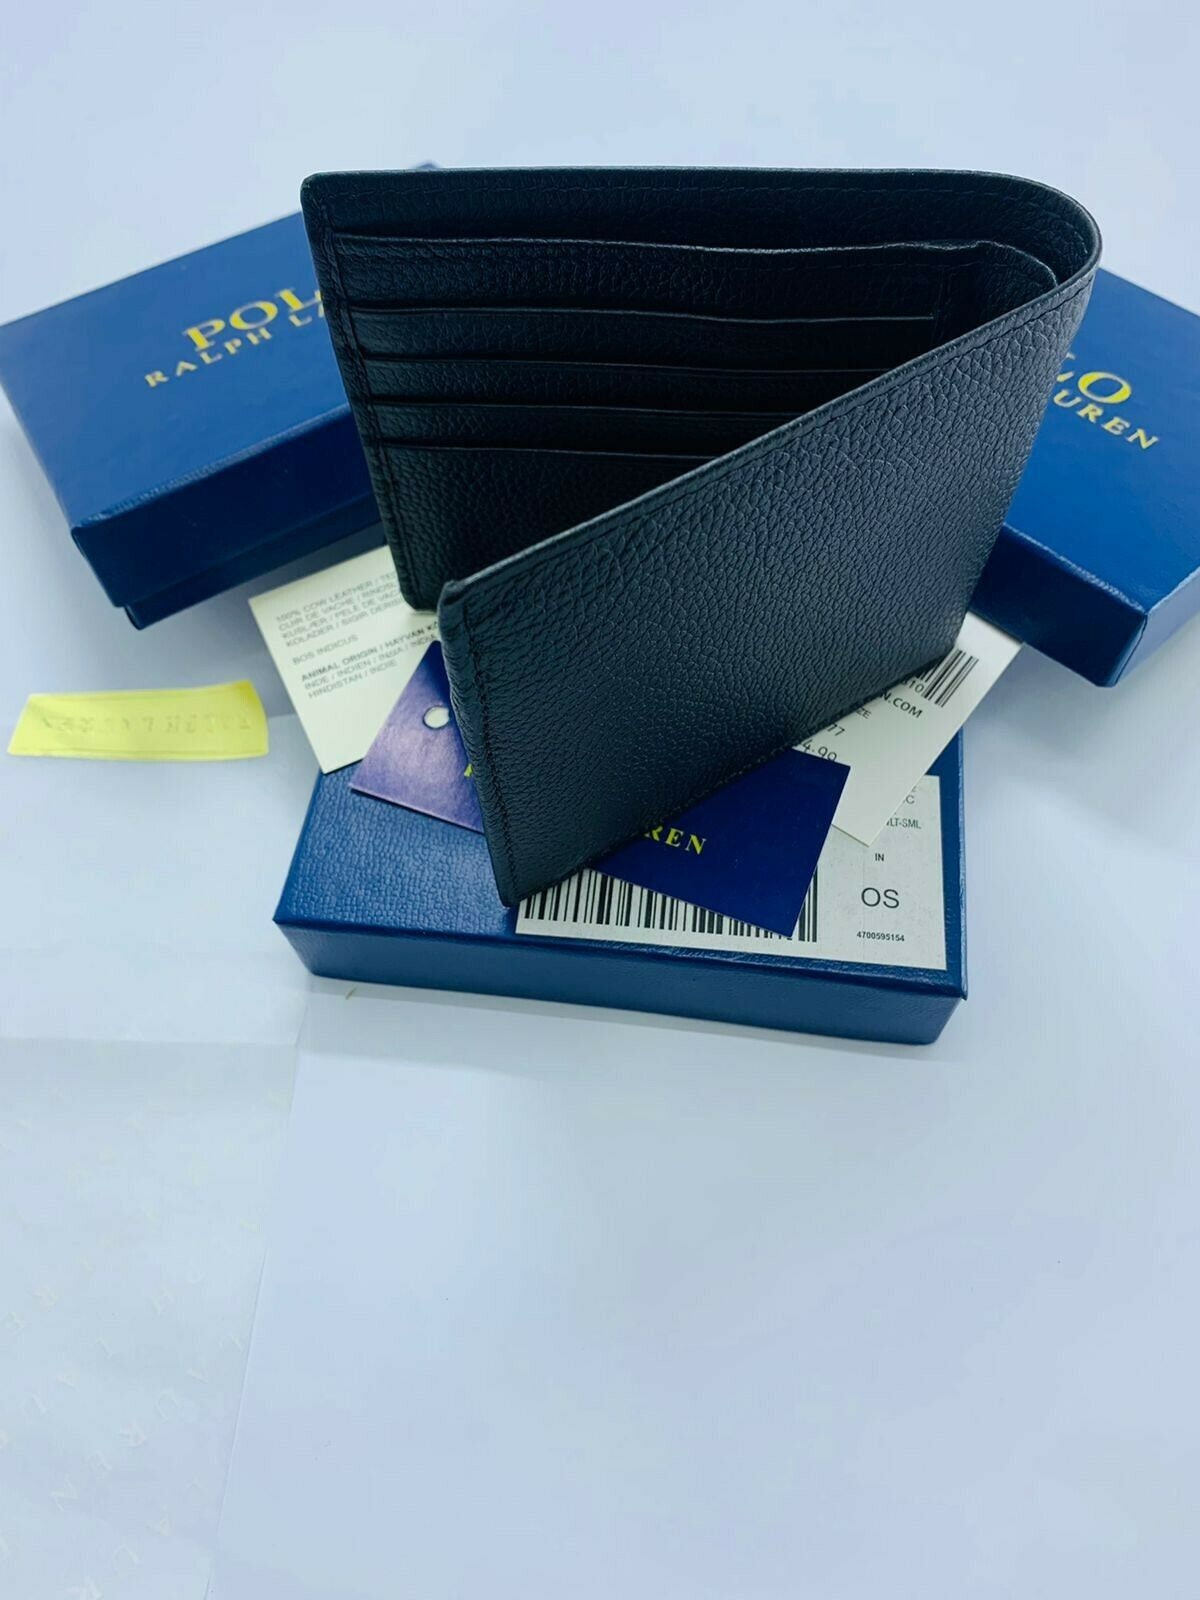 Polo Ralph Lauren Men's Bifold Black Leather Wallet with ID Holder_Great  Gift